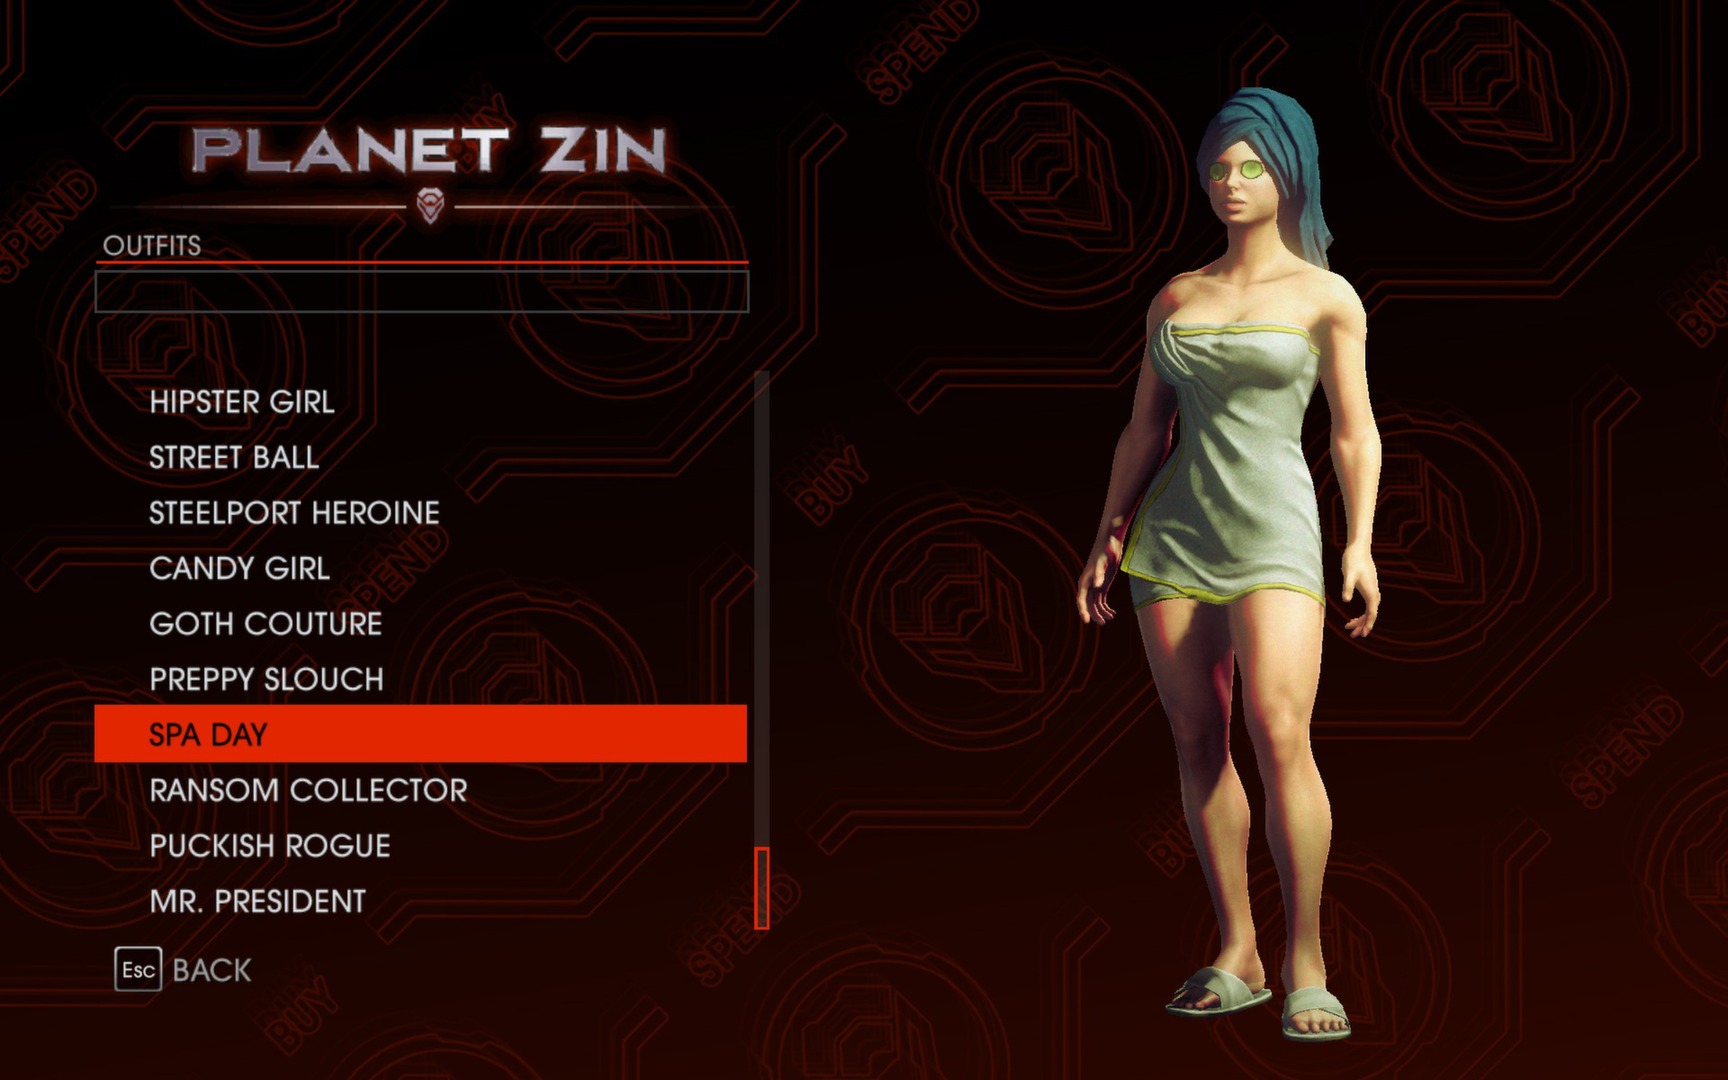 saints row 4 character creation download